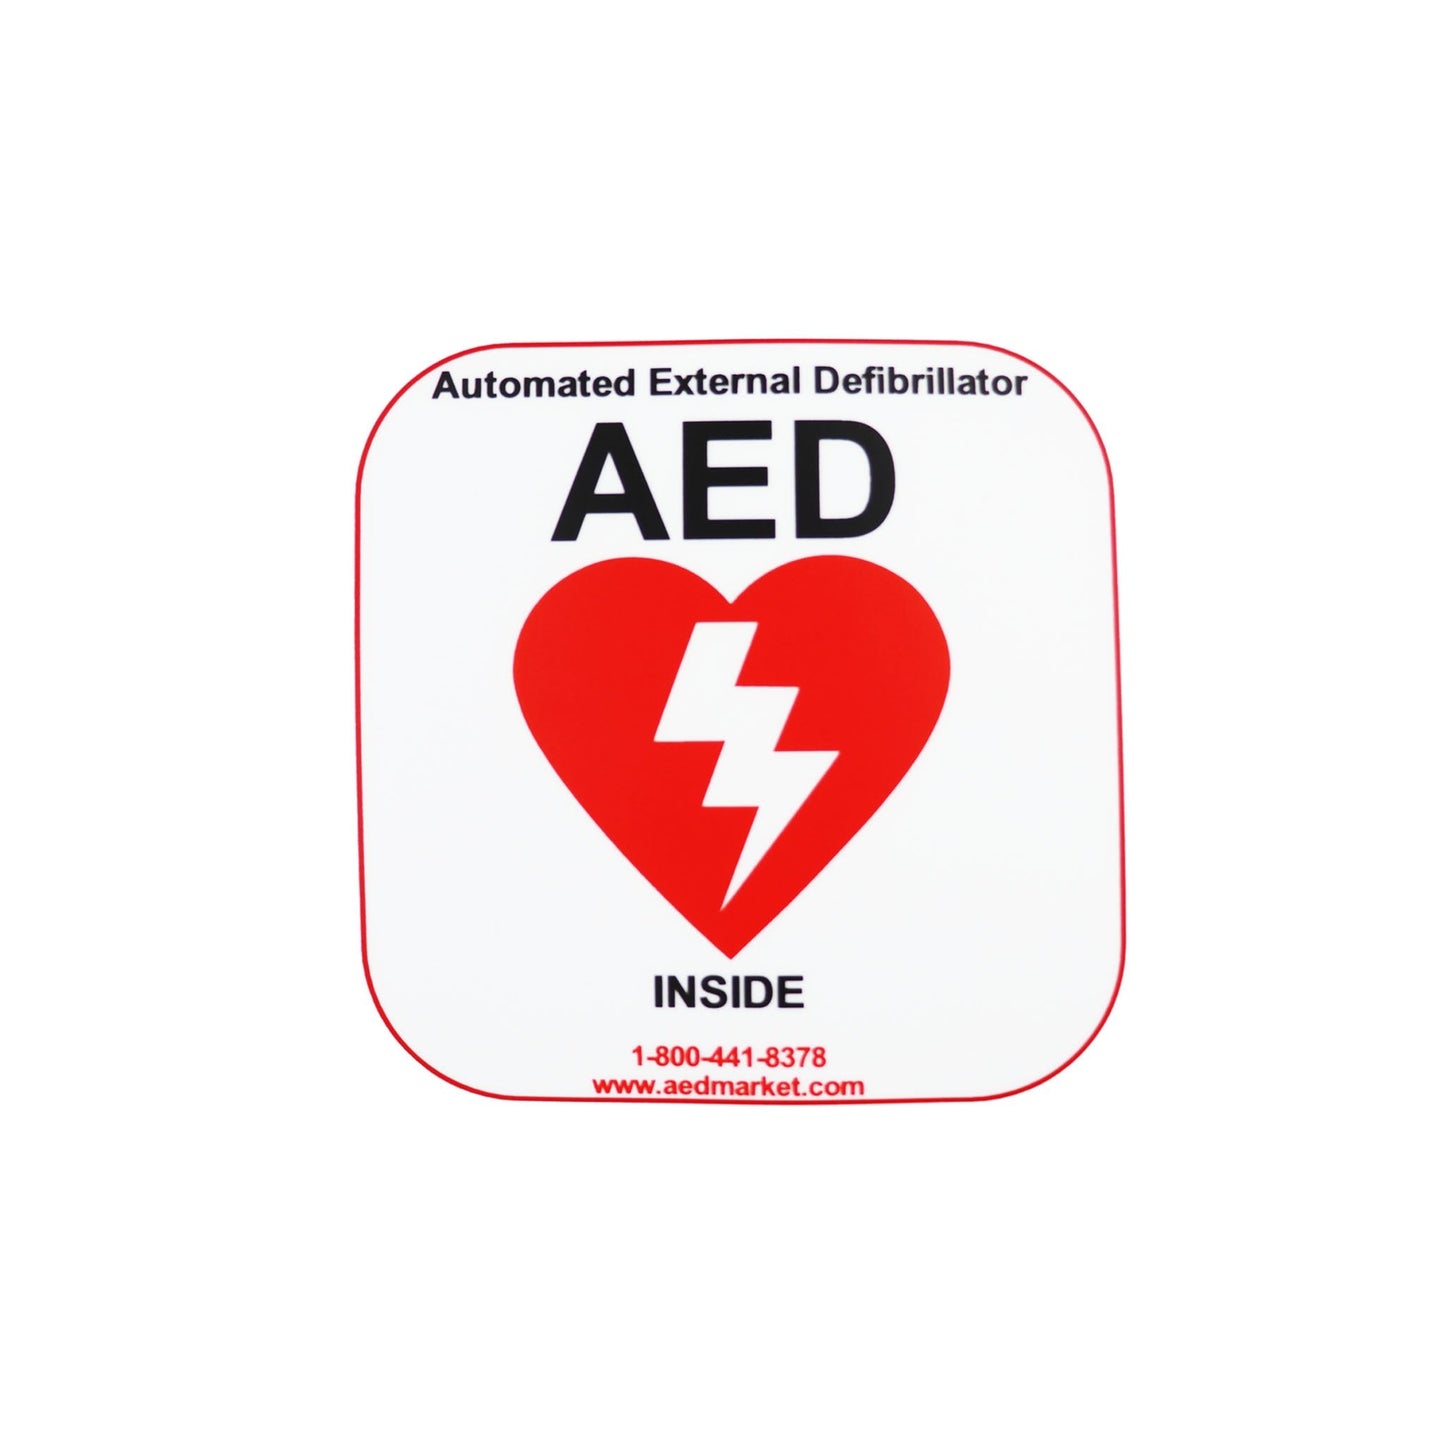 HeartSine Samaritan Pad 350P AED New Complete First Aid and AED Value Package